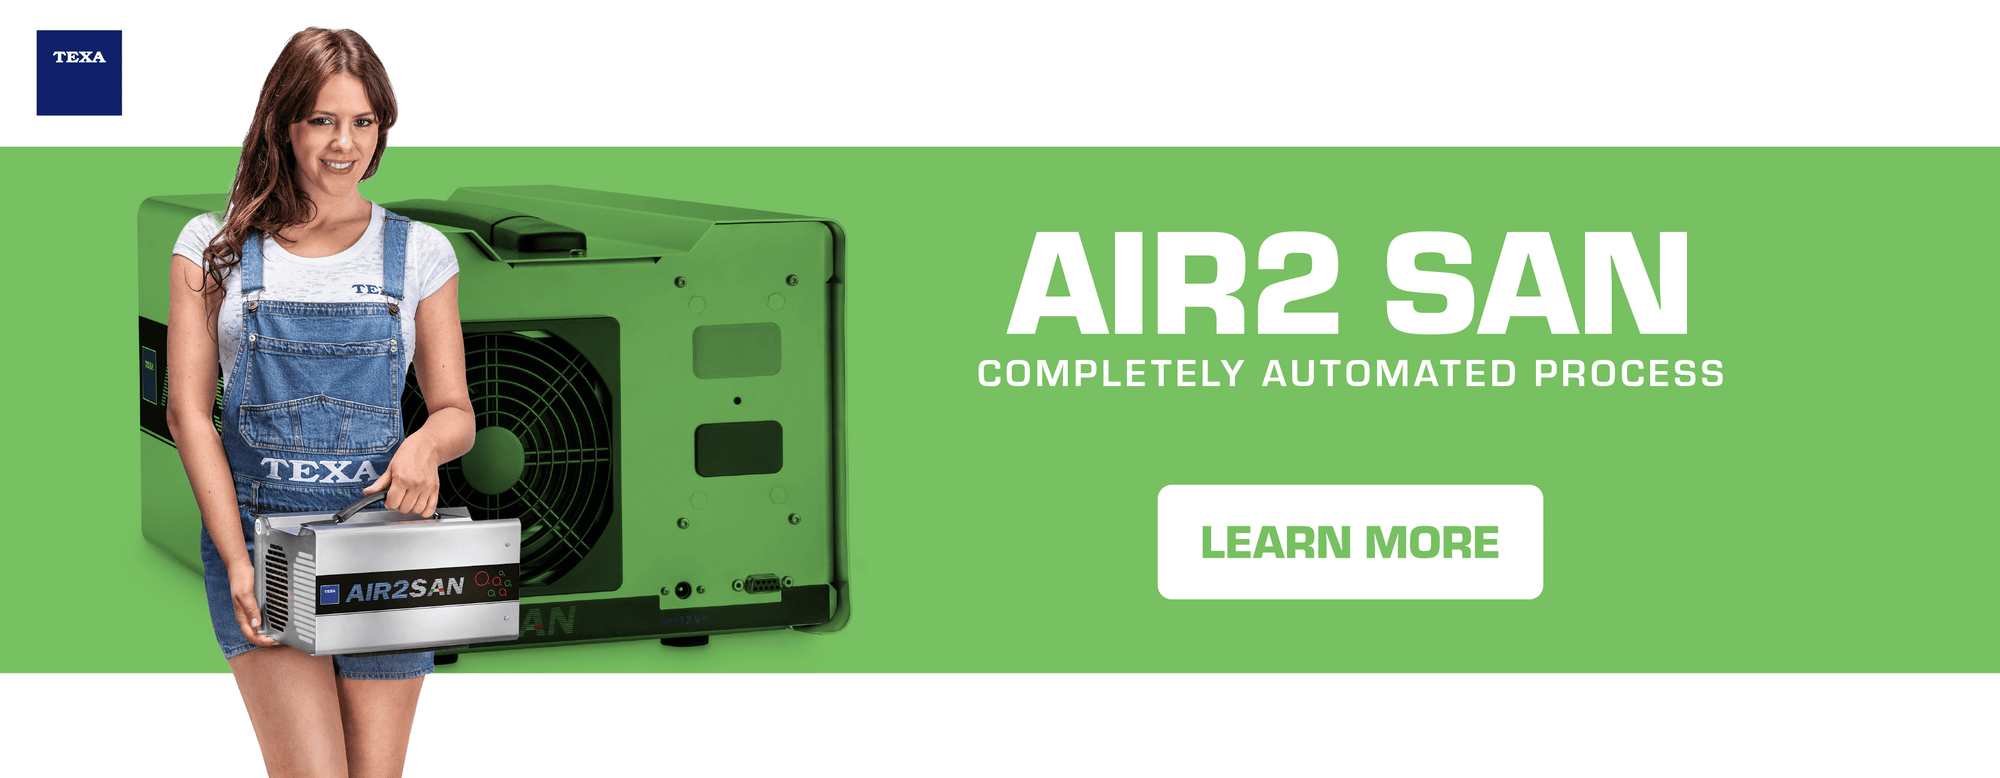 Air2 San: Completely Automated Process